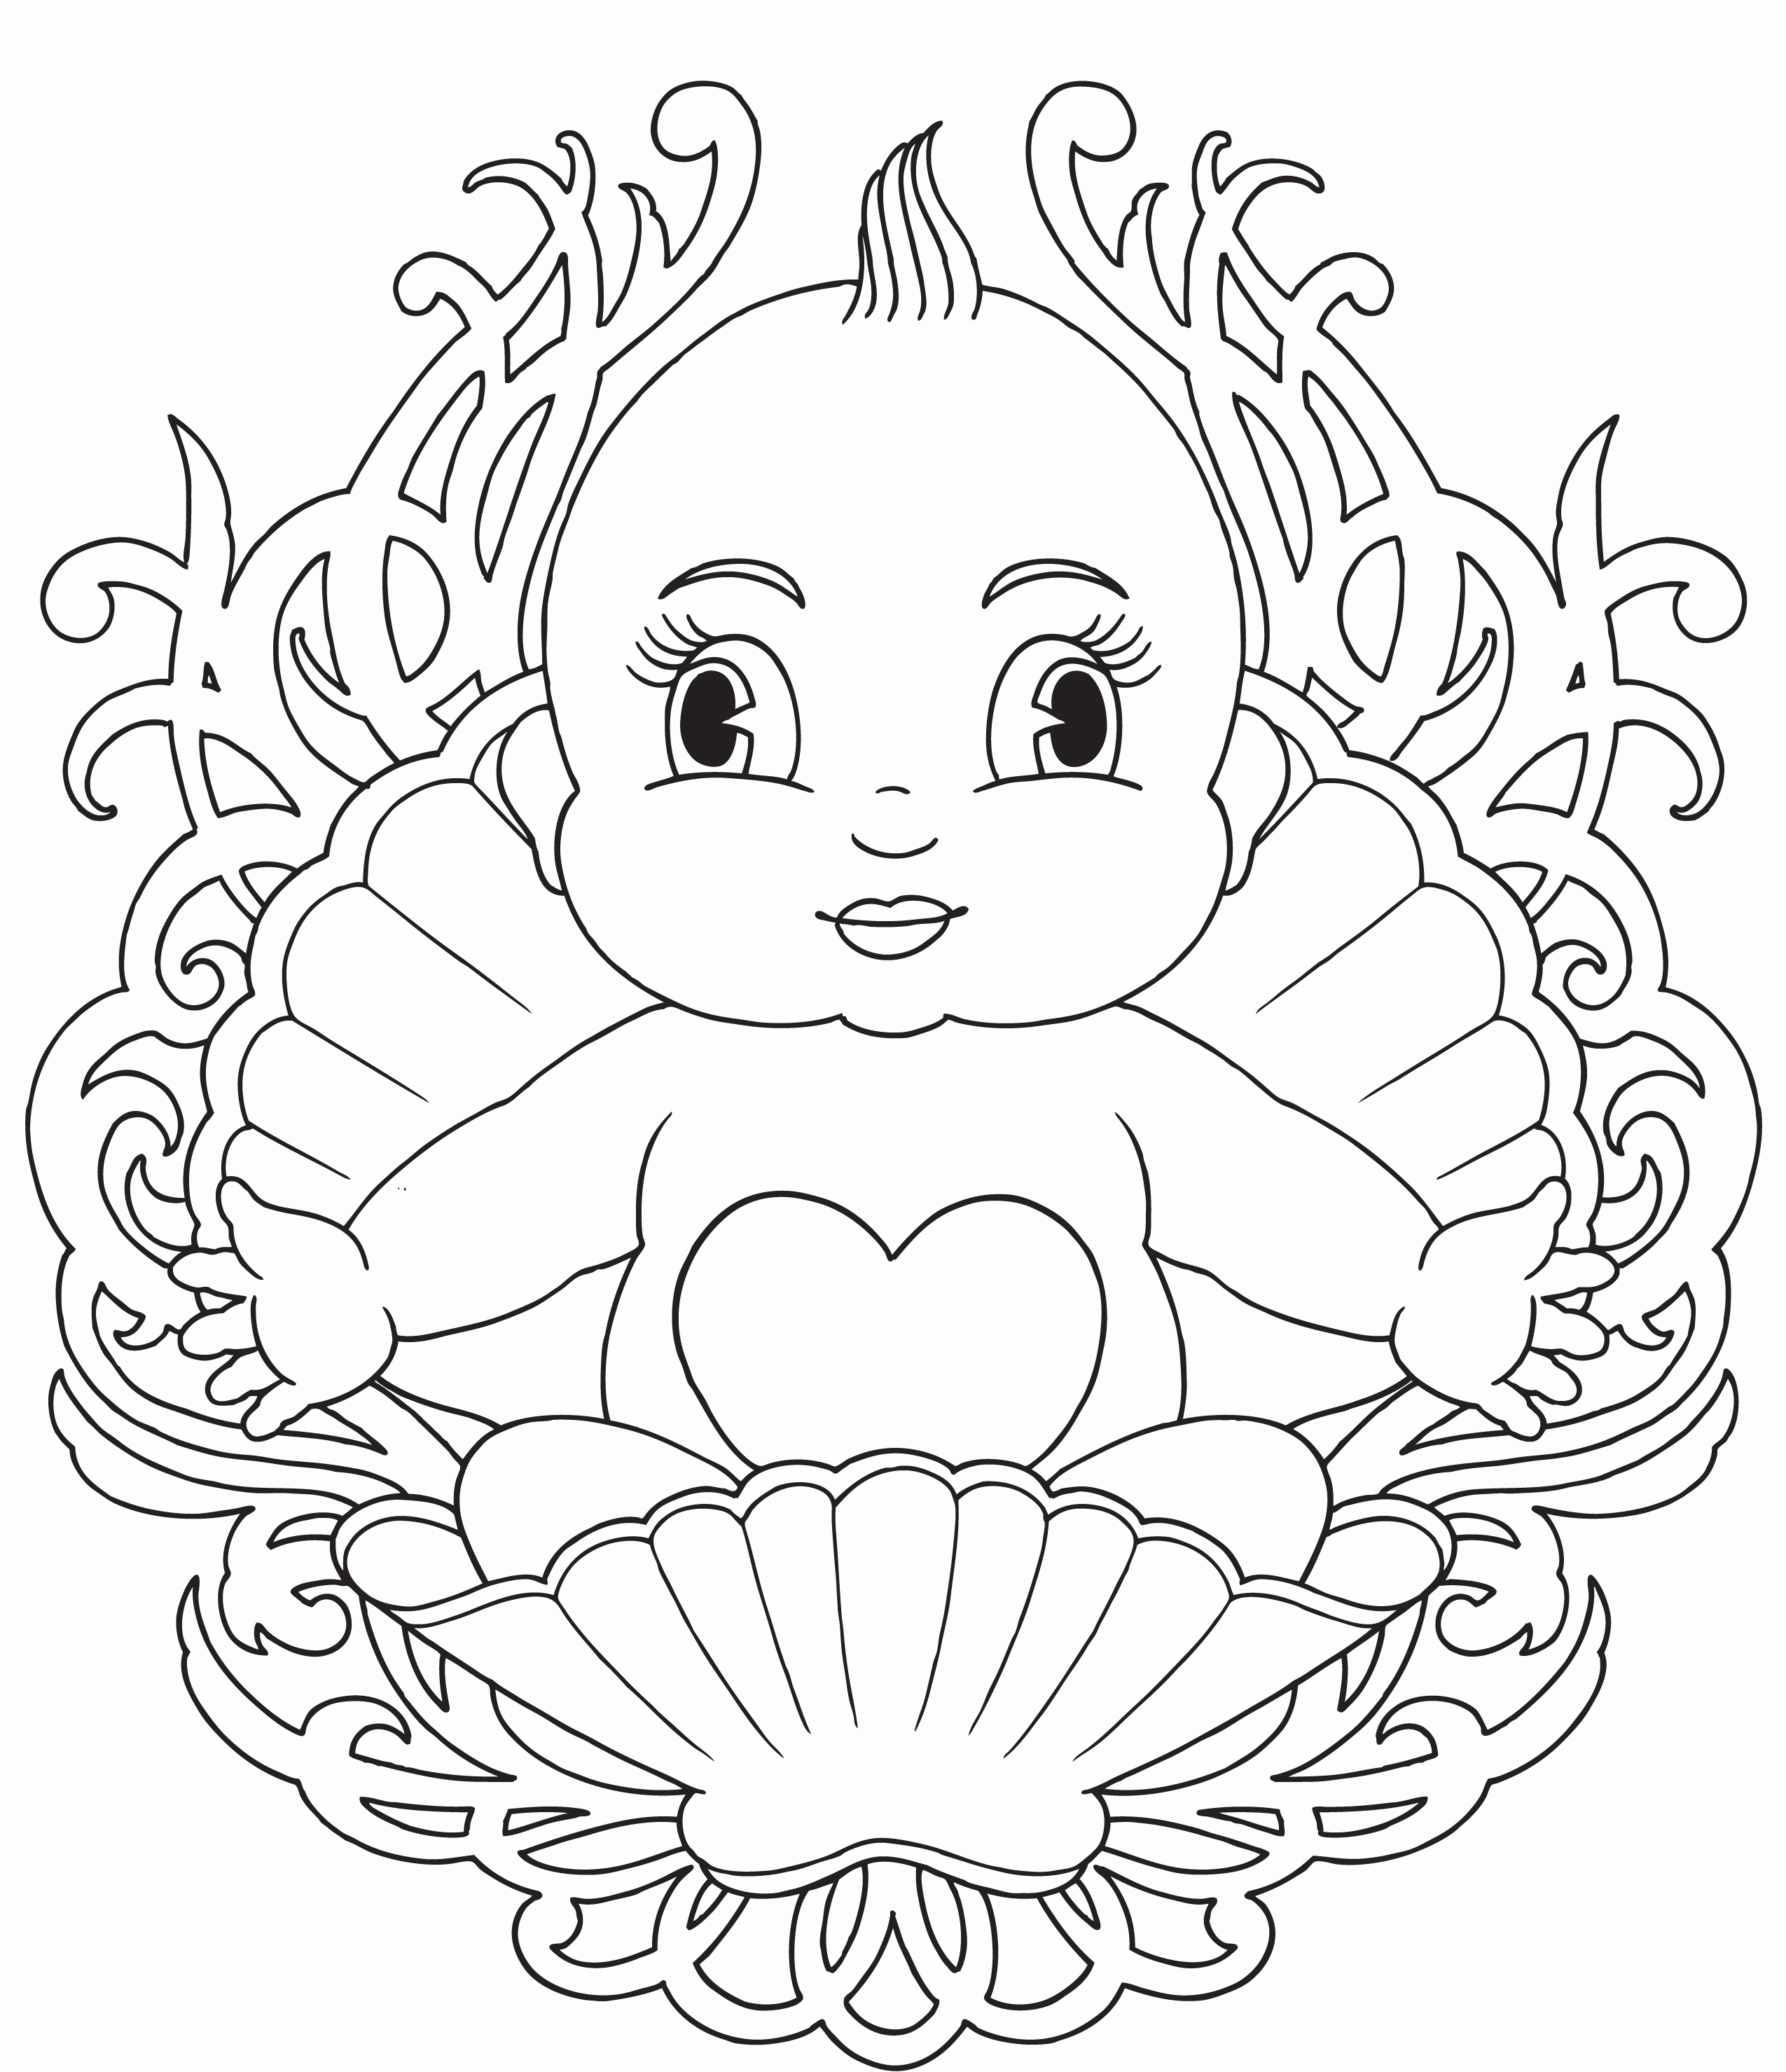 birth-and-newborn-baby-coloring-page-0001-q1